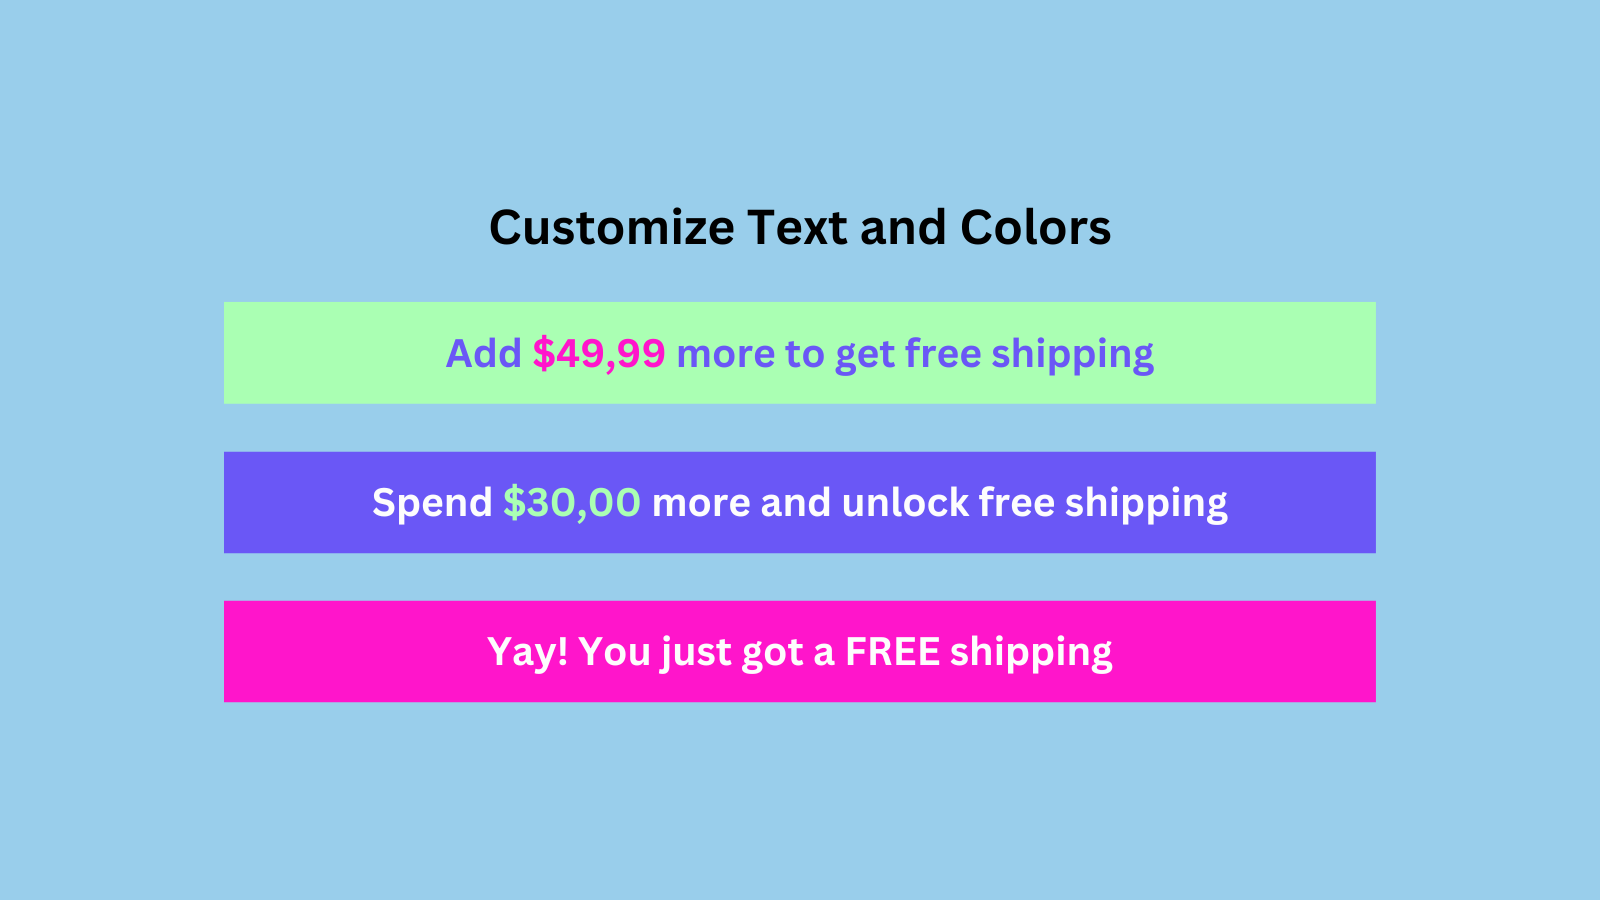 Customizable font and background color of free shipping bar